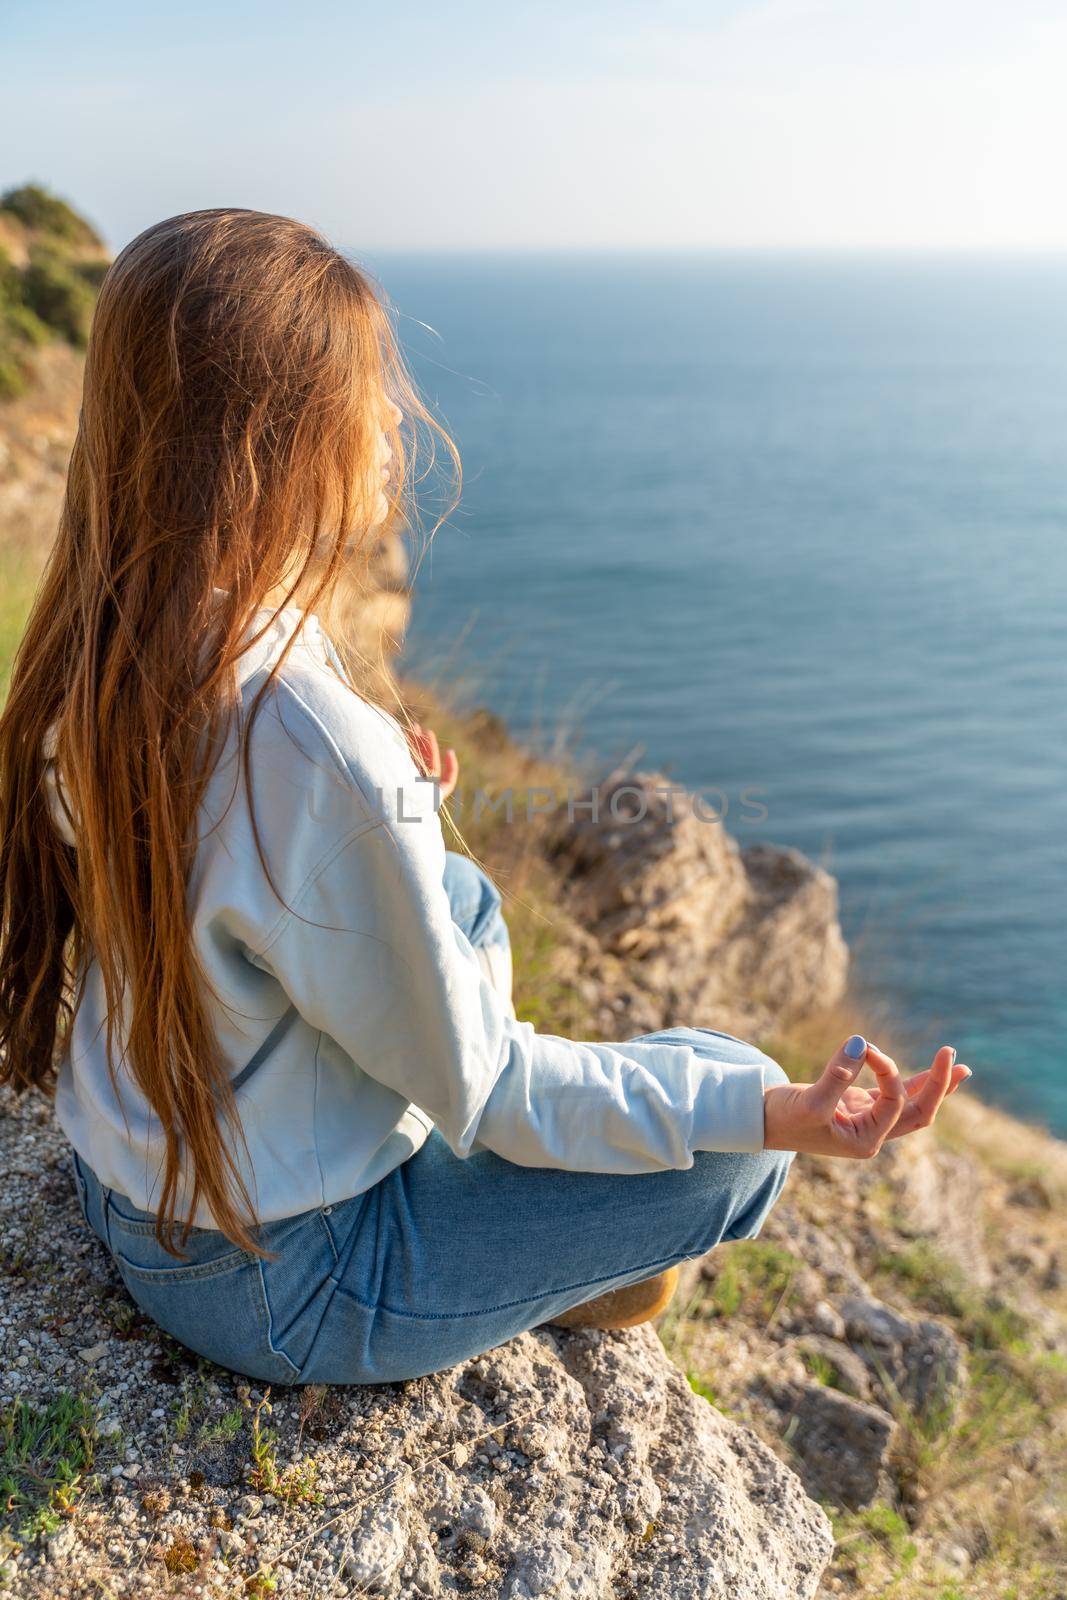 Woman tourist enjoying the sunset over the sea mountain landscape. Sits outdoors on a rock above the sea. She is wearing jeans and a blue hoodie. Healthy lifestyle, harmony and meditation.